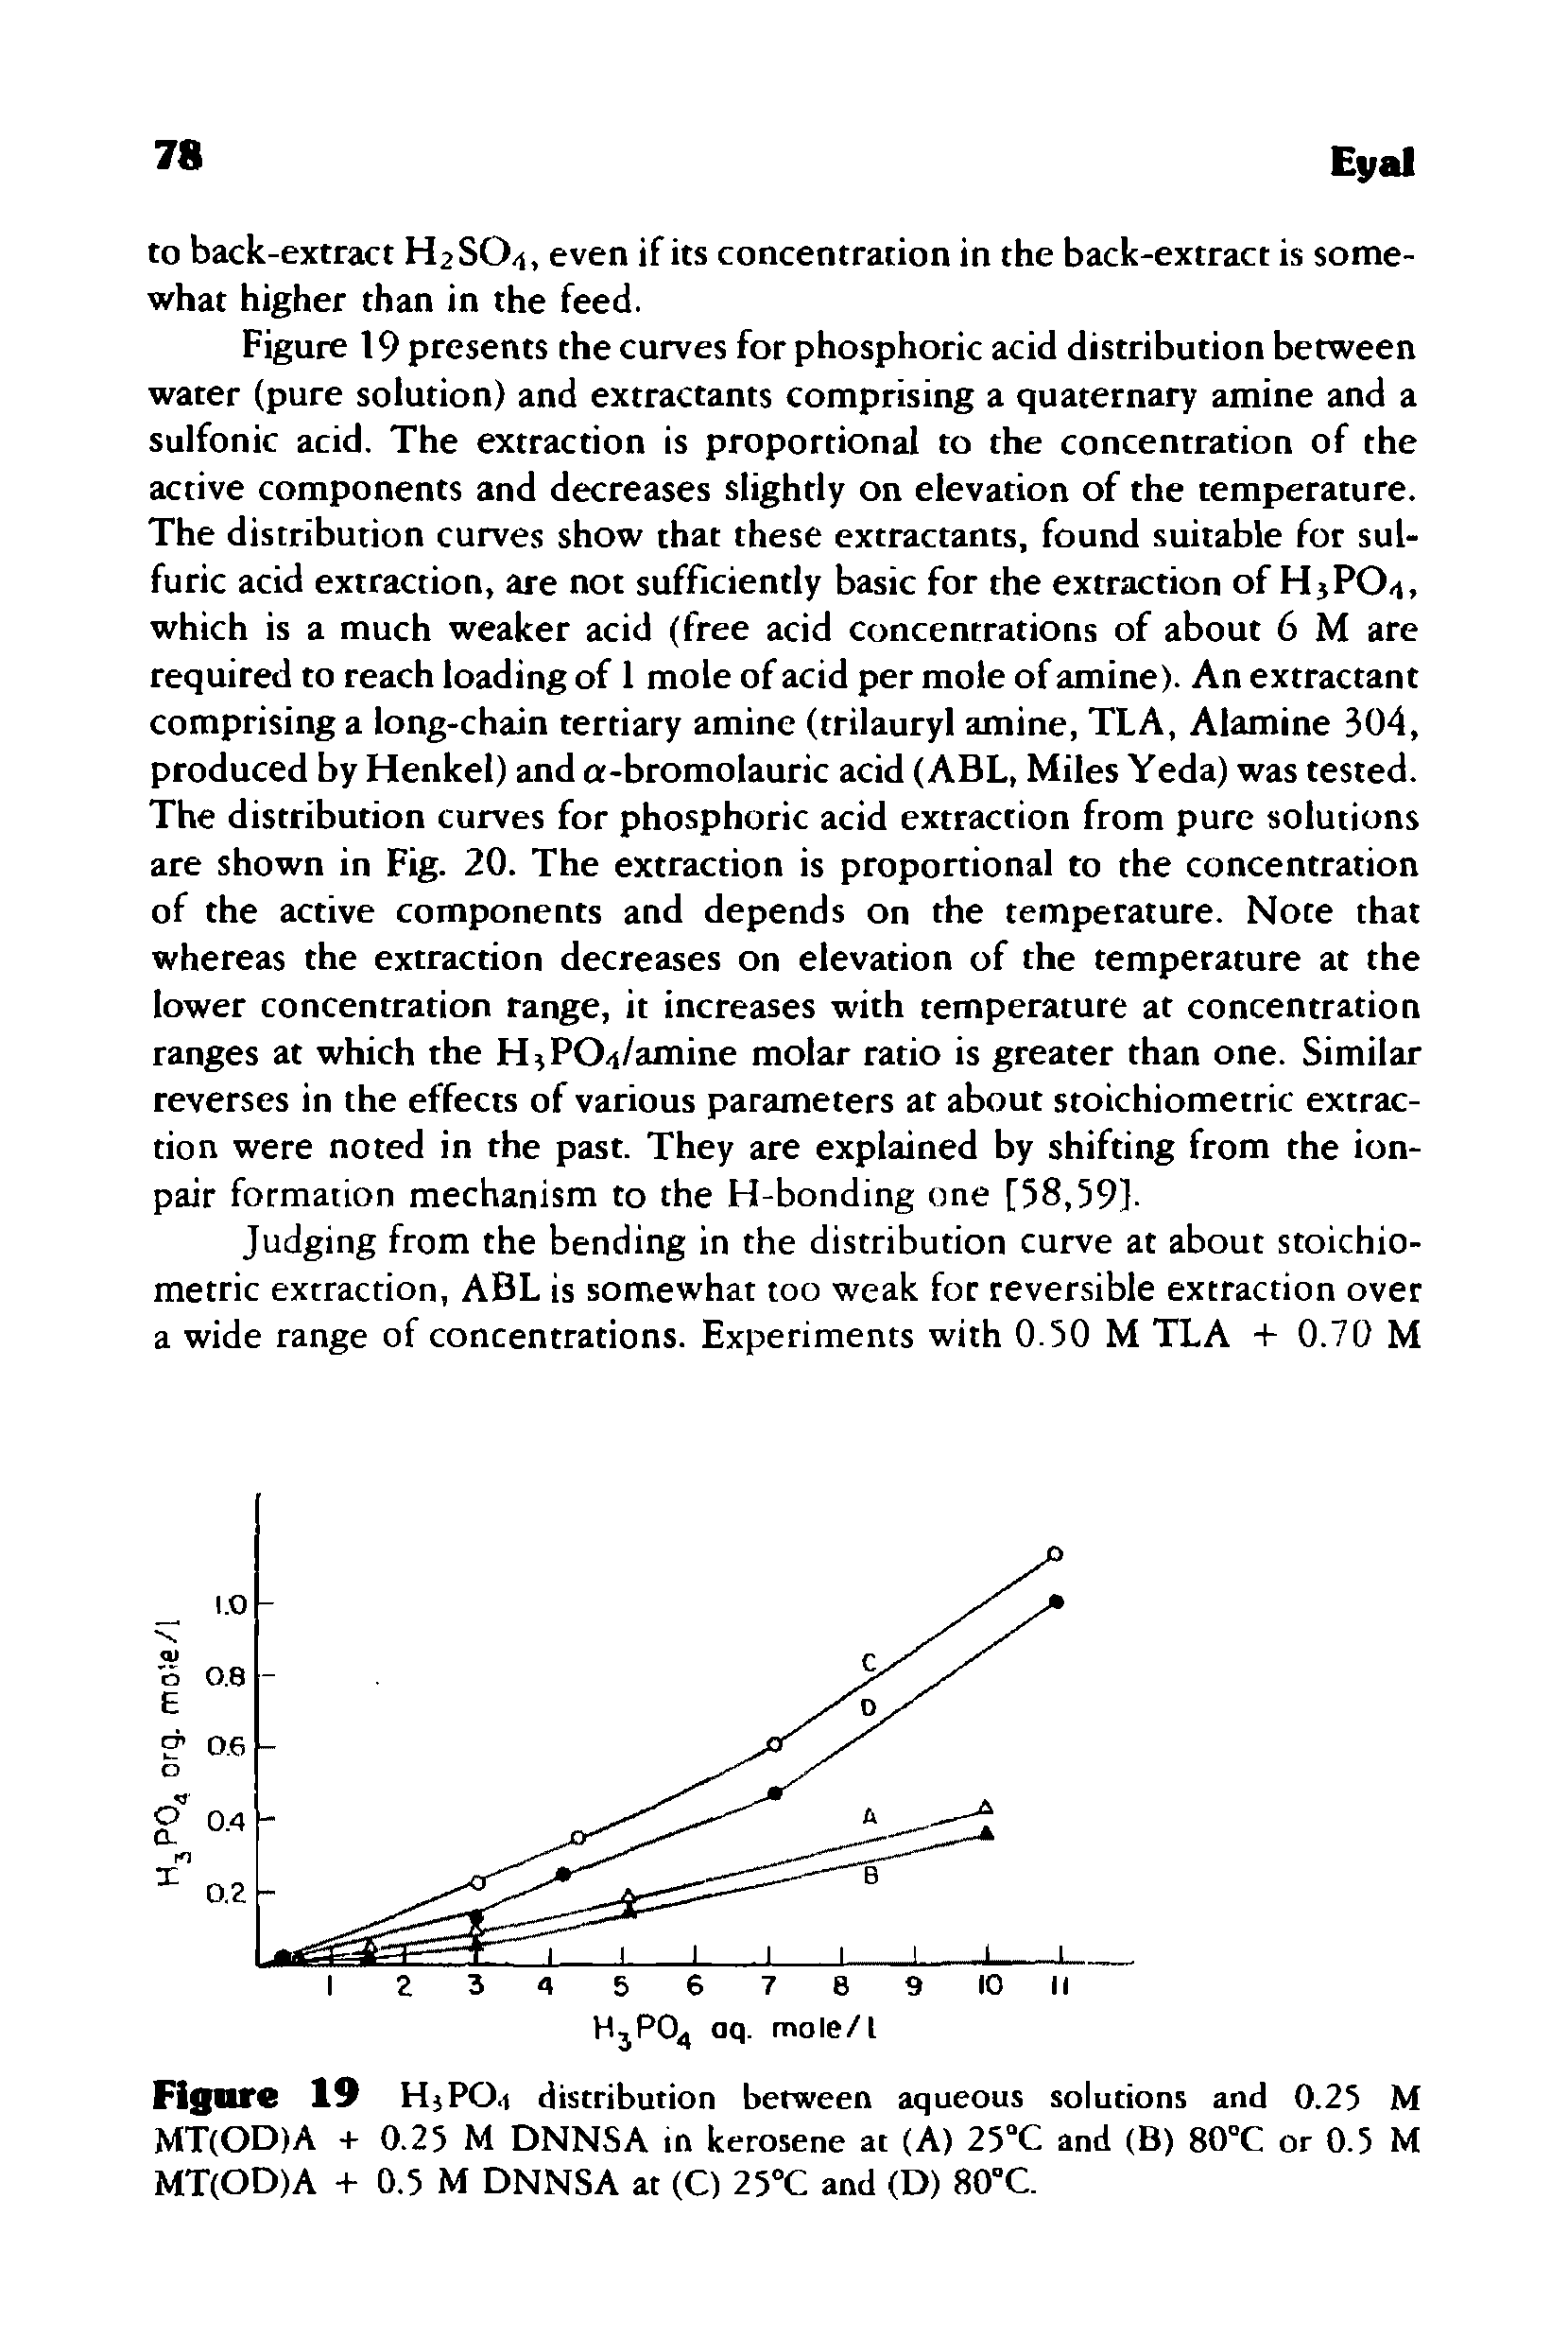 Figure 19 presents the curves for phosphoric acid distribution between water (pure solution) and extractants comprising a quaternary amine and a sulfonic acid. The extraction is proportional to the concentration of the active components and decreases slightly on elevation of the temperature. The distribution curves show that these extractants, found suitable for sulfuric acid extraction, are not sufficiently basic for the extraction of HsPO i, which is a much weaker acid (free acid concentrations of about 6 M are required to reach loading of 1 mole of acid per mole of amine). An extractant comprising a long-chain tertiary amine (trilauryl amine, TLA, Alamine 304, produced by Henkel) and a-bromolauric acid (ABL, Miles Yeda) was tested. The distribution curves for phosphoric acid extraction from pure solutions are shown in Fig. 20. The extraction is proportional to the concentration of the active components and depends on the temperature. Note that whereas the extraction decreases on elevation of the temperature at the lower concentration range, it increases with temperature at concentration ranges at which the H PO /amine molar ratio is greater than one. Similar reverses in the effects of various parameters at about stoichiometric extraction were noted in the past. They are explained by shifting from the ion-pair formation mechanism to the H-bonding one [58,59].